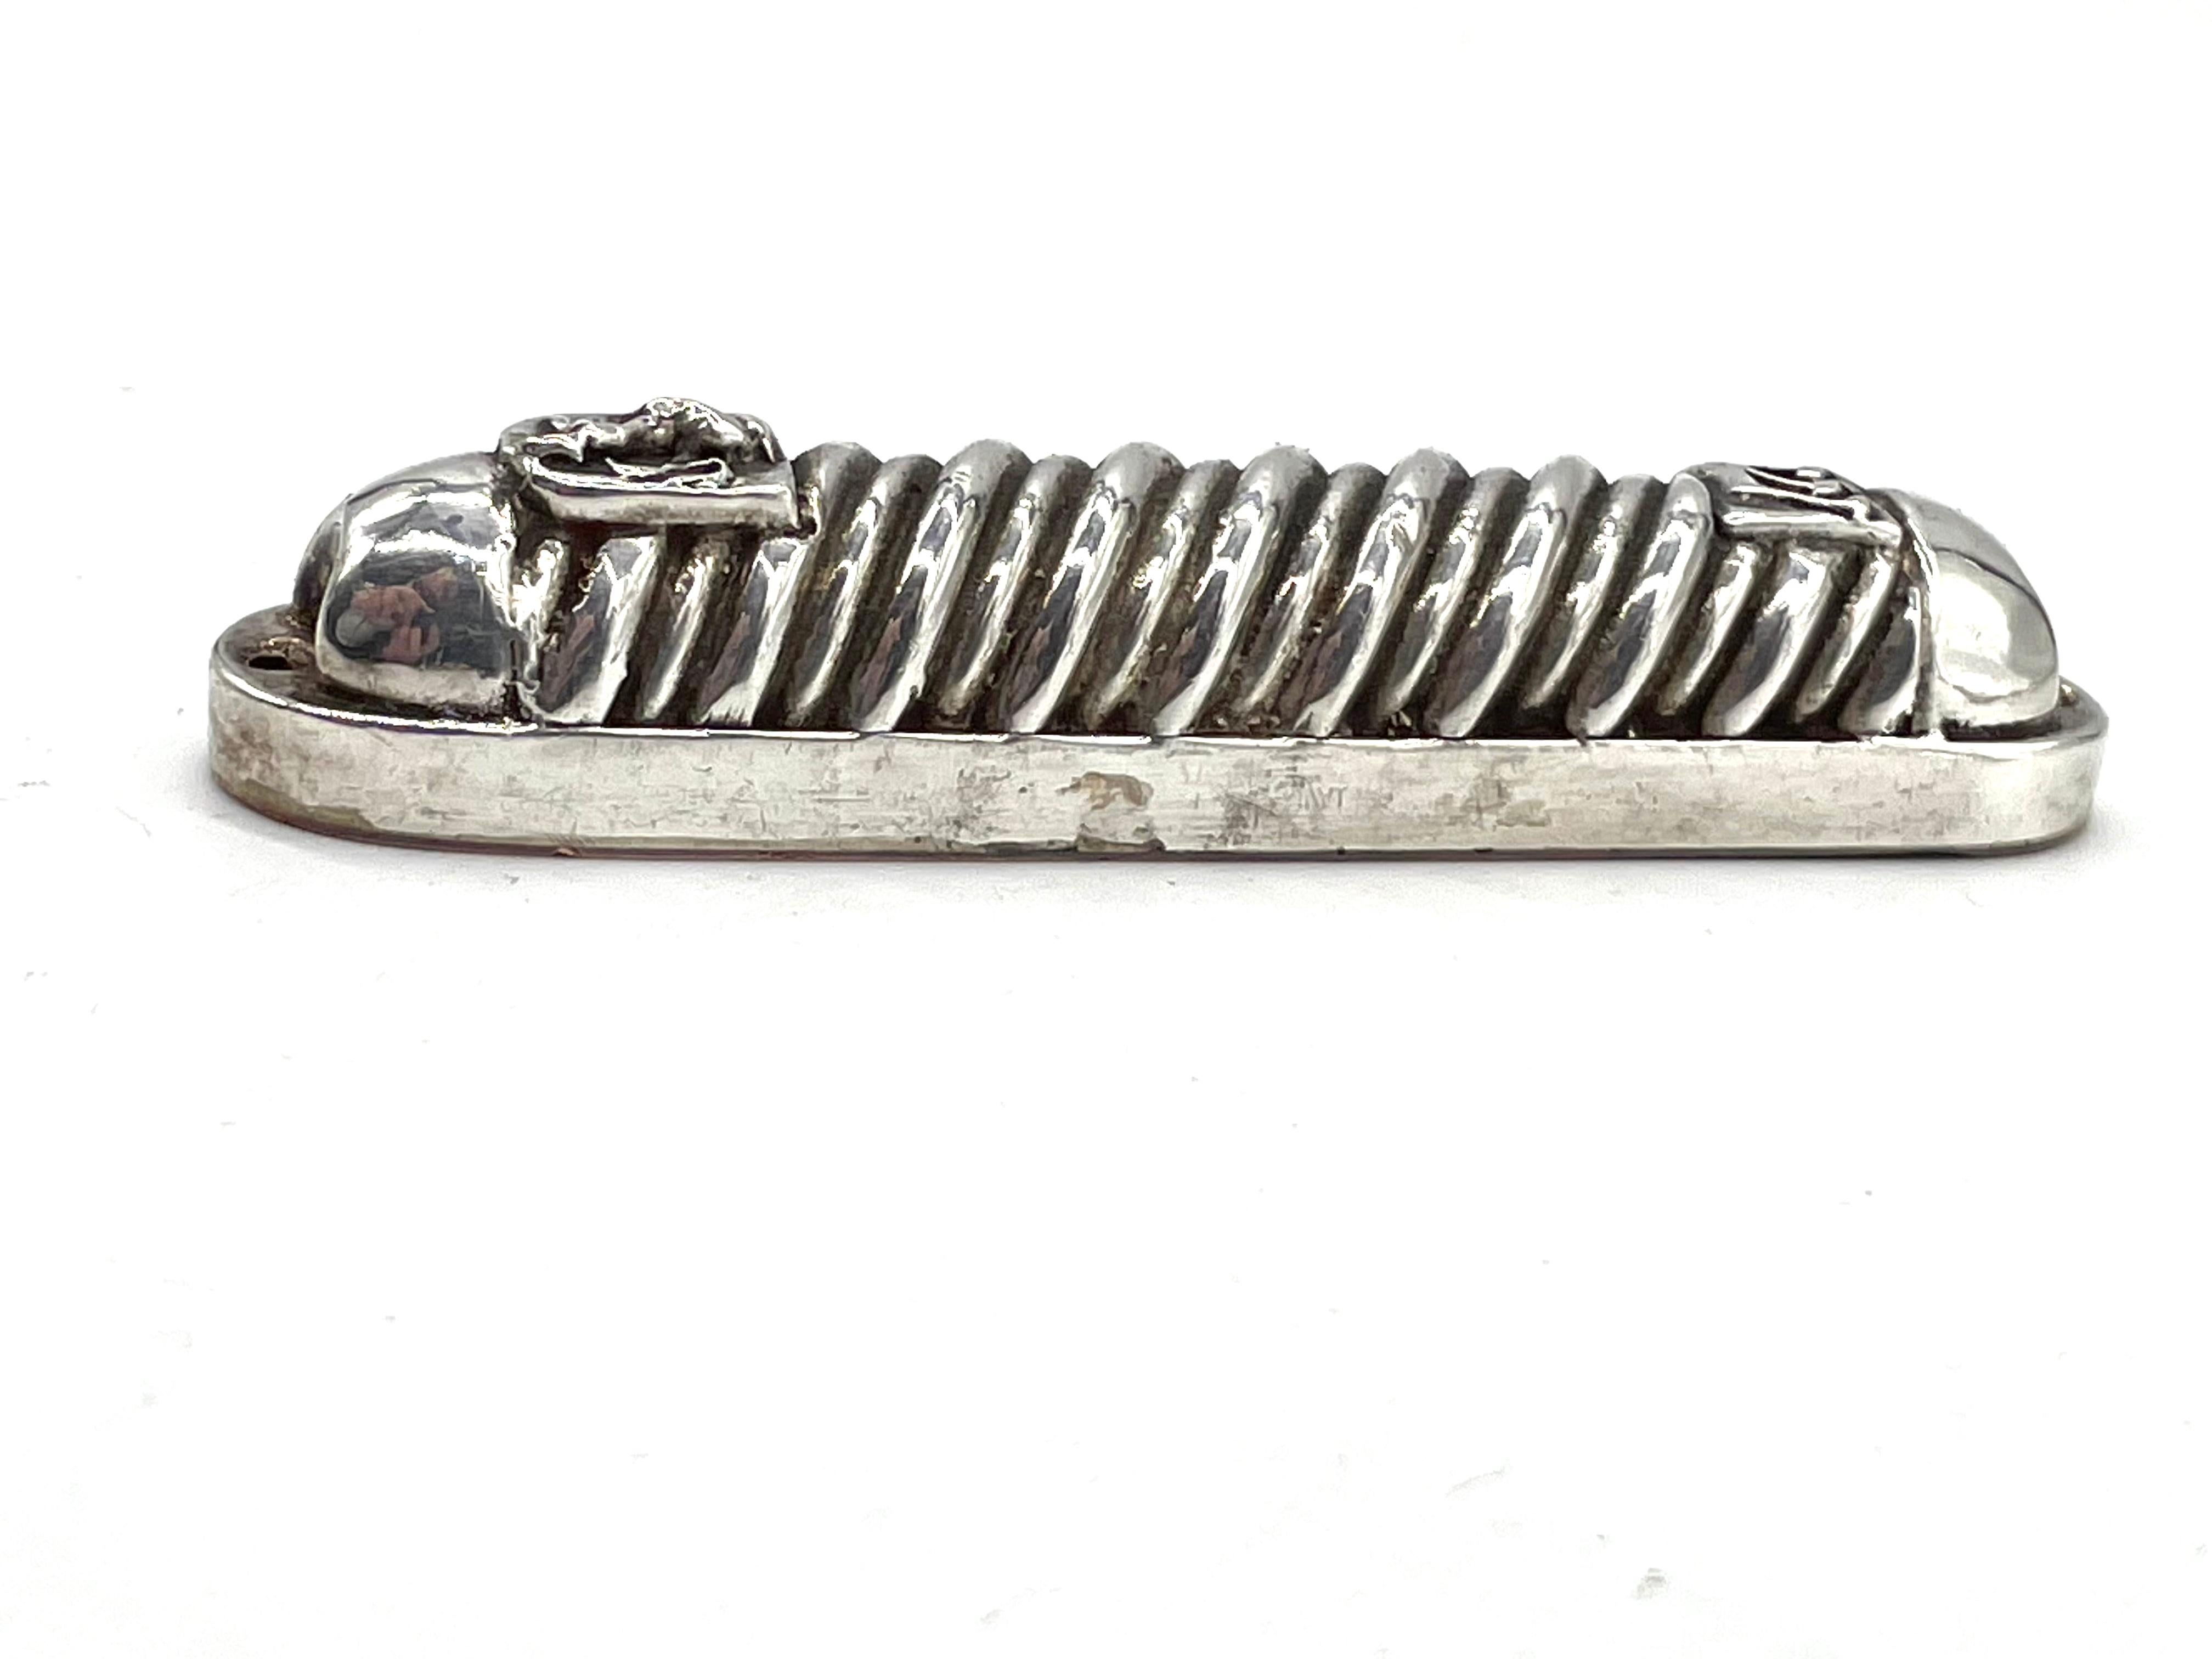 Pure silver mezuzah case by Henryk Winograd. Decorated with spiral motives, the Hebrew letter Shin referring to g-d appears at its top, while a lion referring to the Lion of Judea appears in its bottom. 

Henryk Winograd was one of the world's